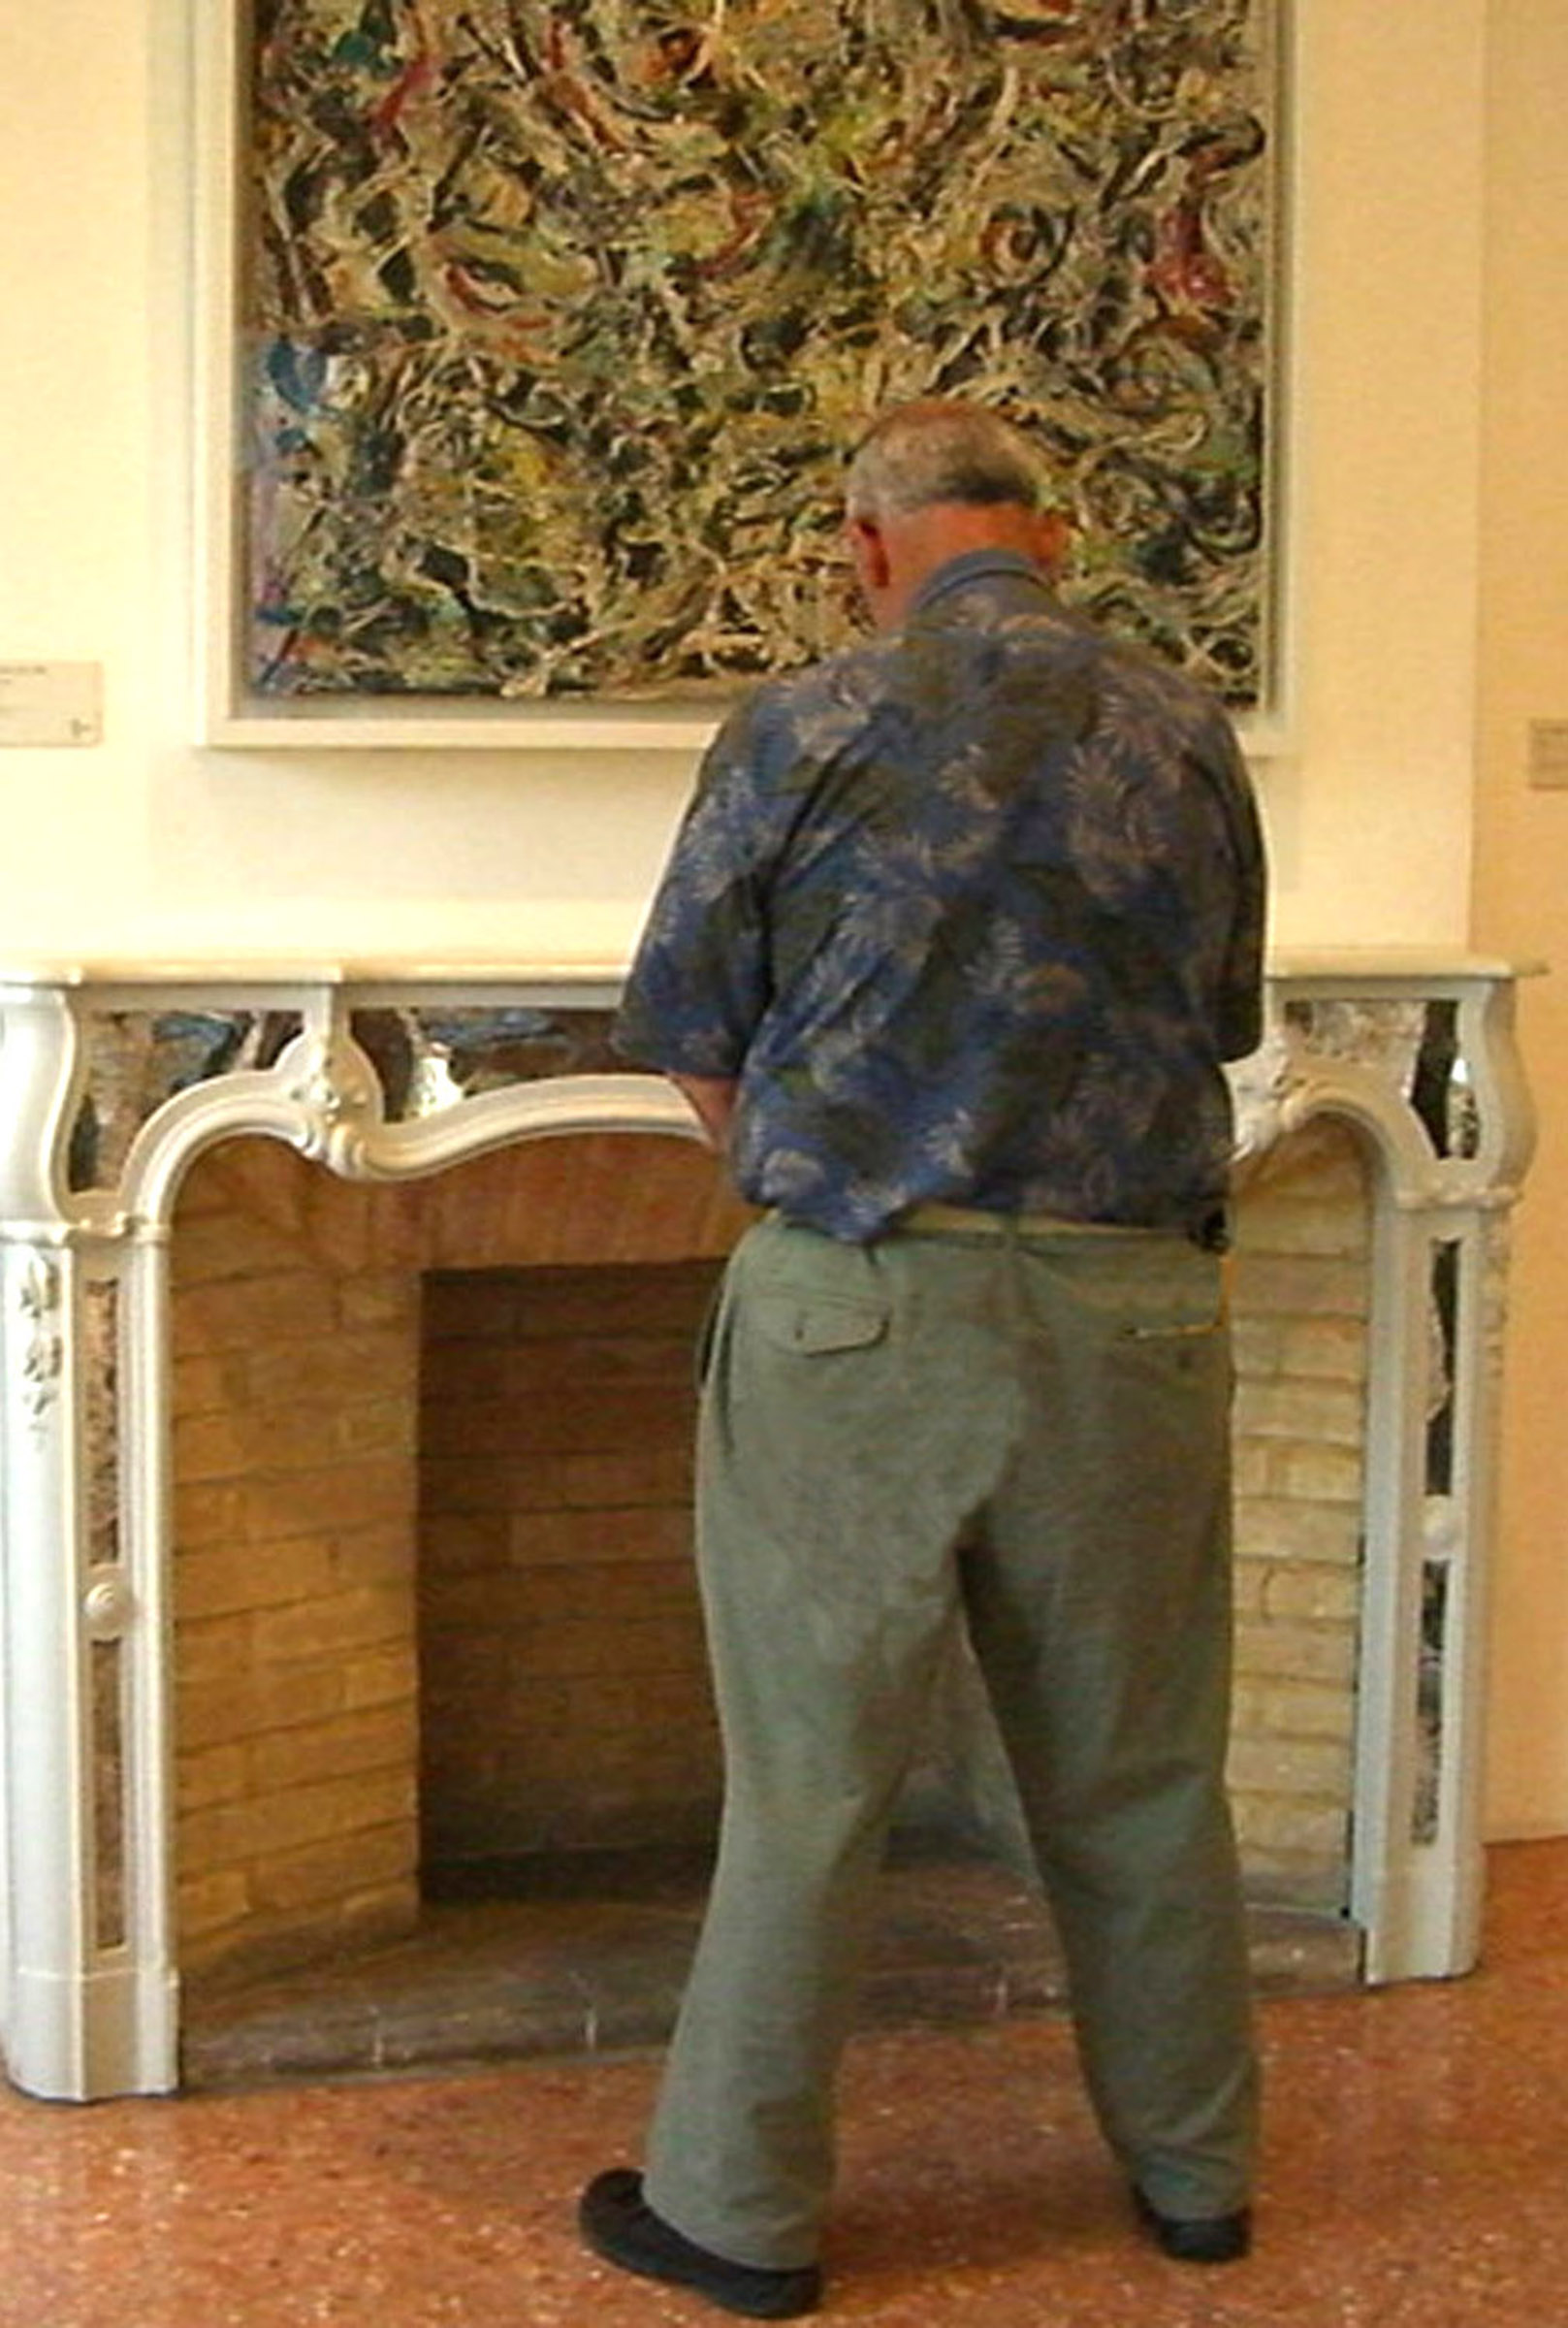 Me as Jackson Pollock at the Peggy Guggenheim Fireplace Venice 1991